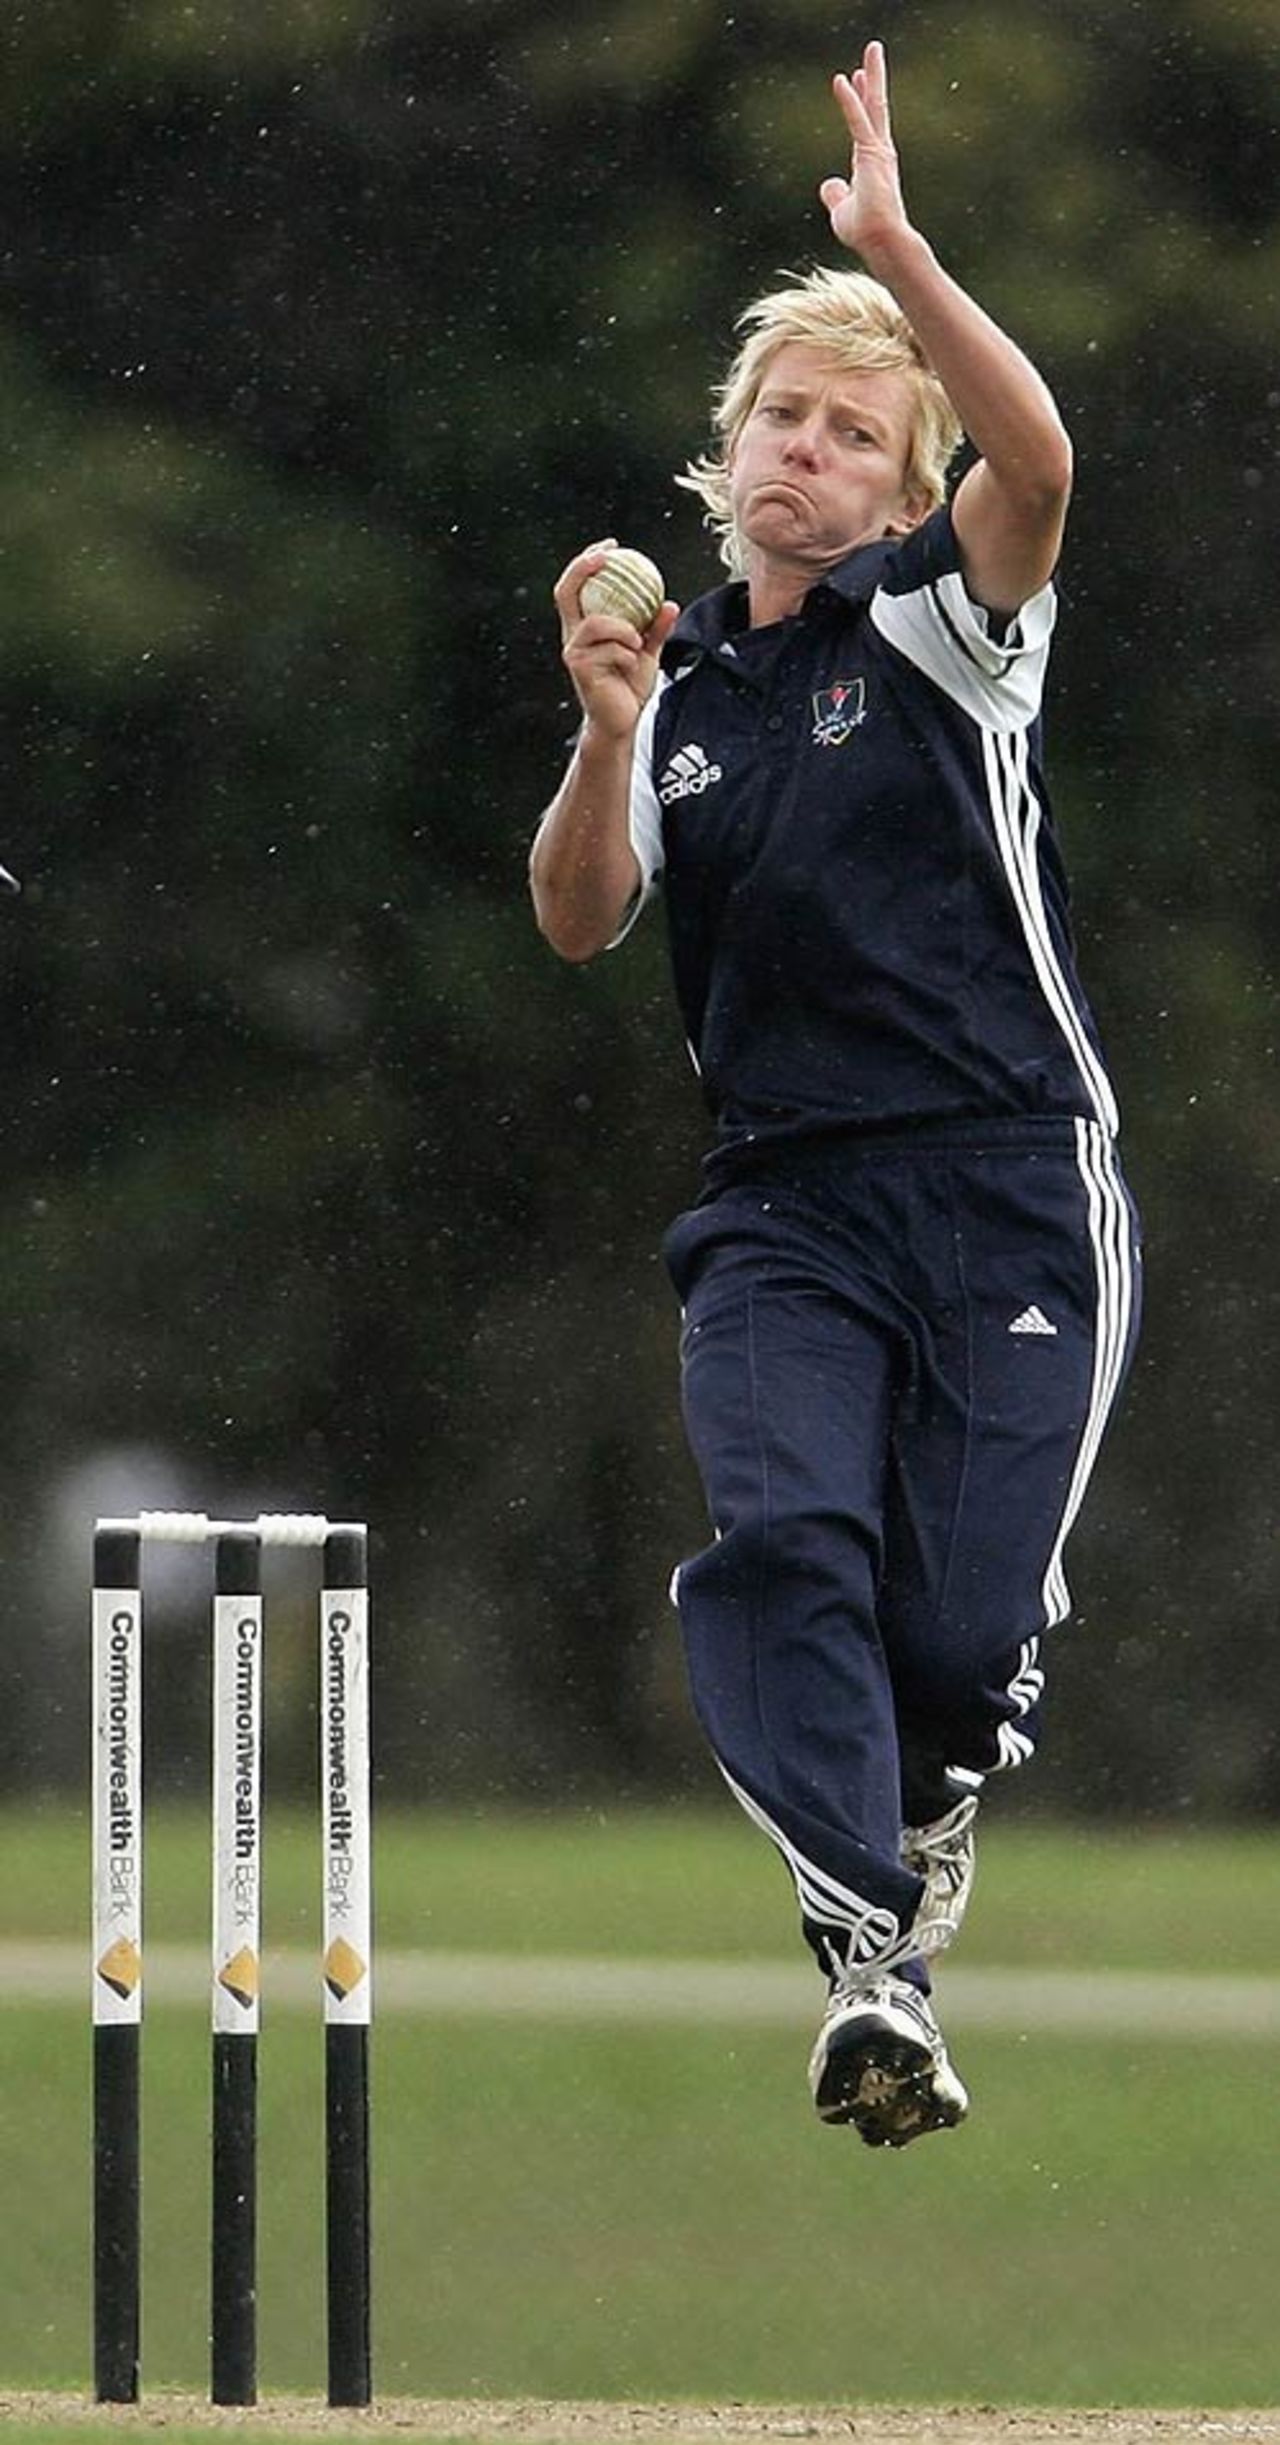 Cathryn Fitzpatrick bowls during her spell of 6 for 22, Victoria v New South Wales, WNCL 2nd final, Melbourne, January 27, 2007